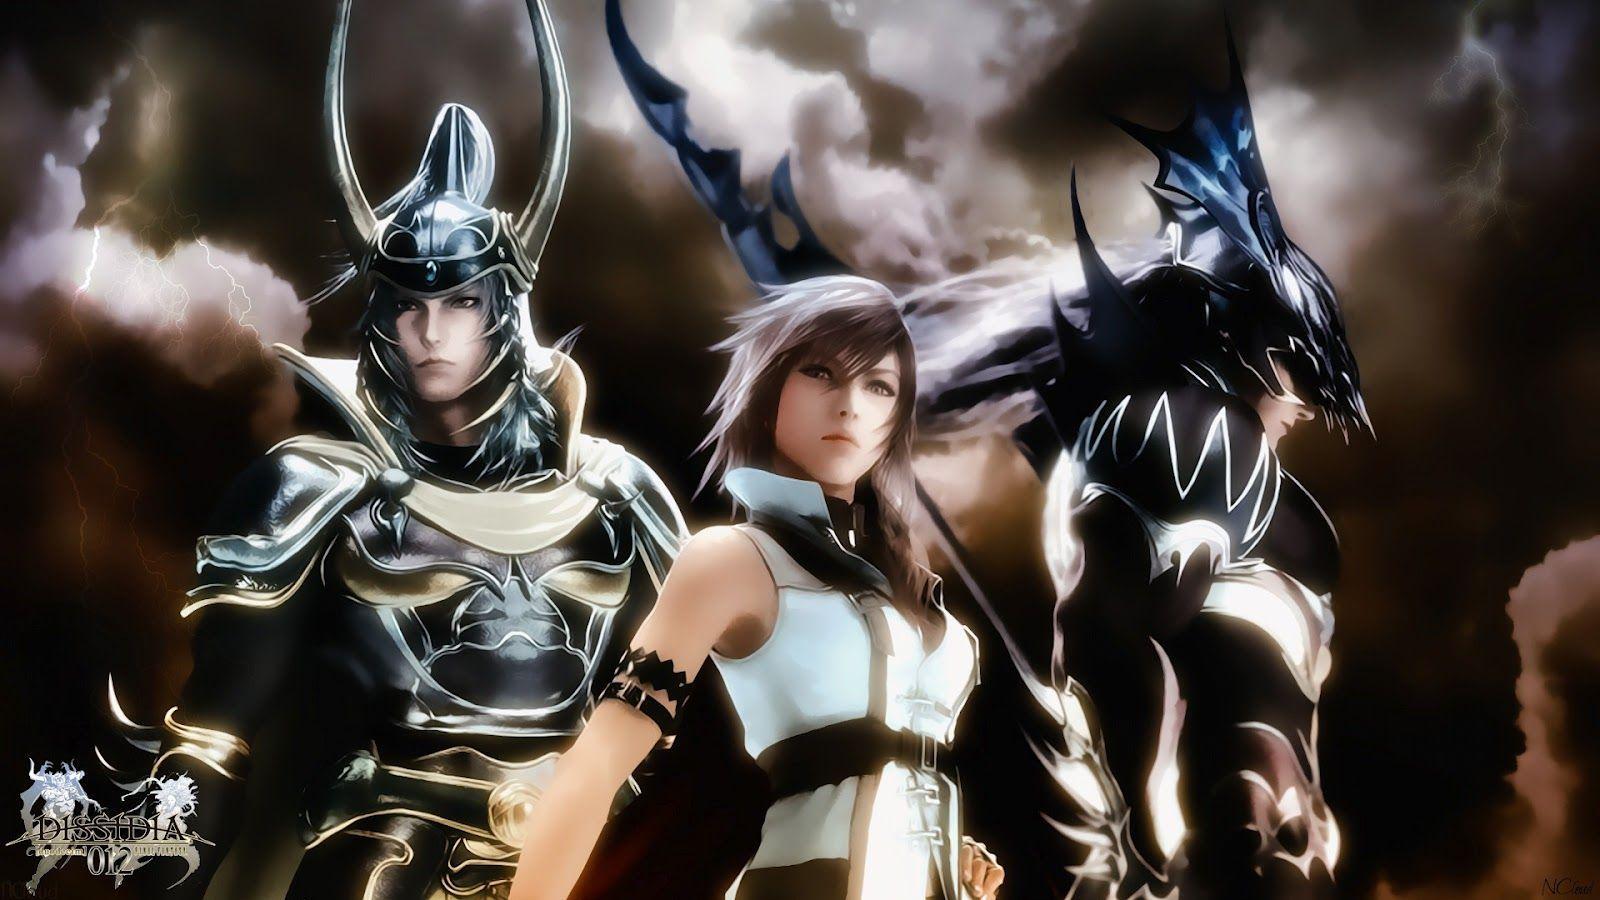 Dissidia Final Fantasy Wallpapers and theme for Windows 7